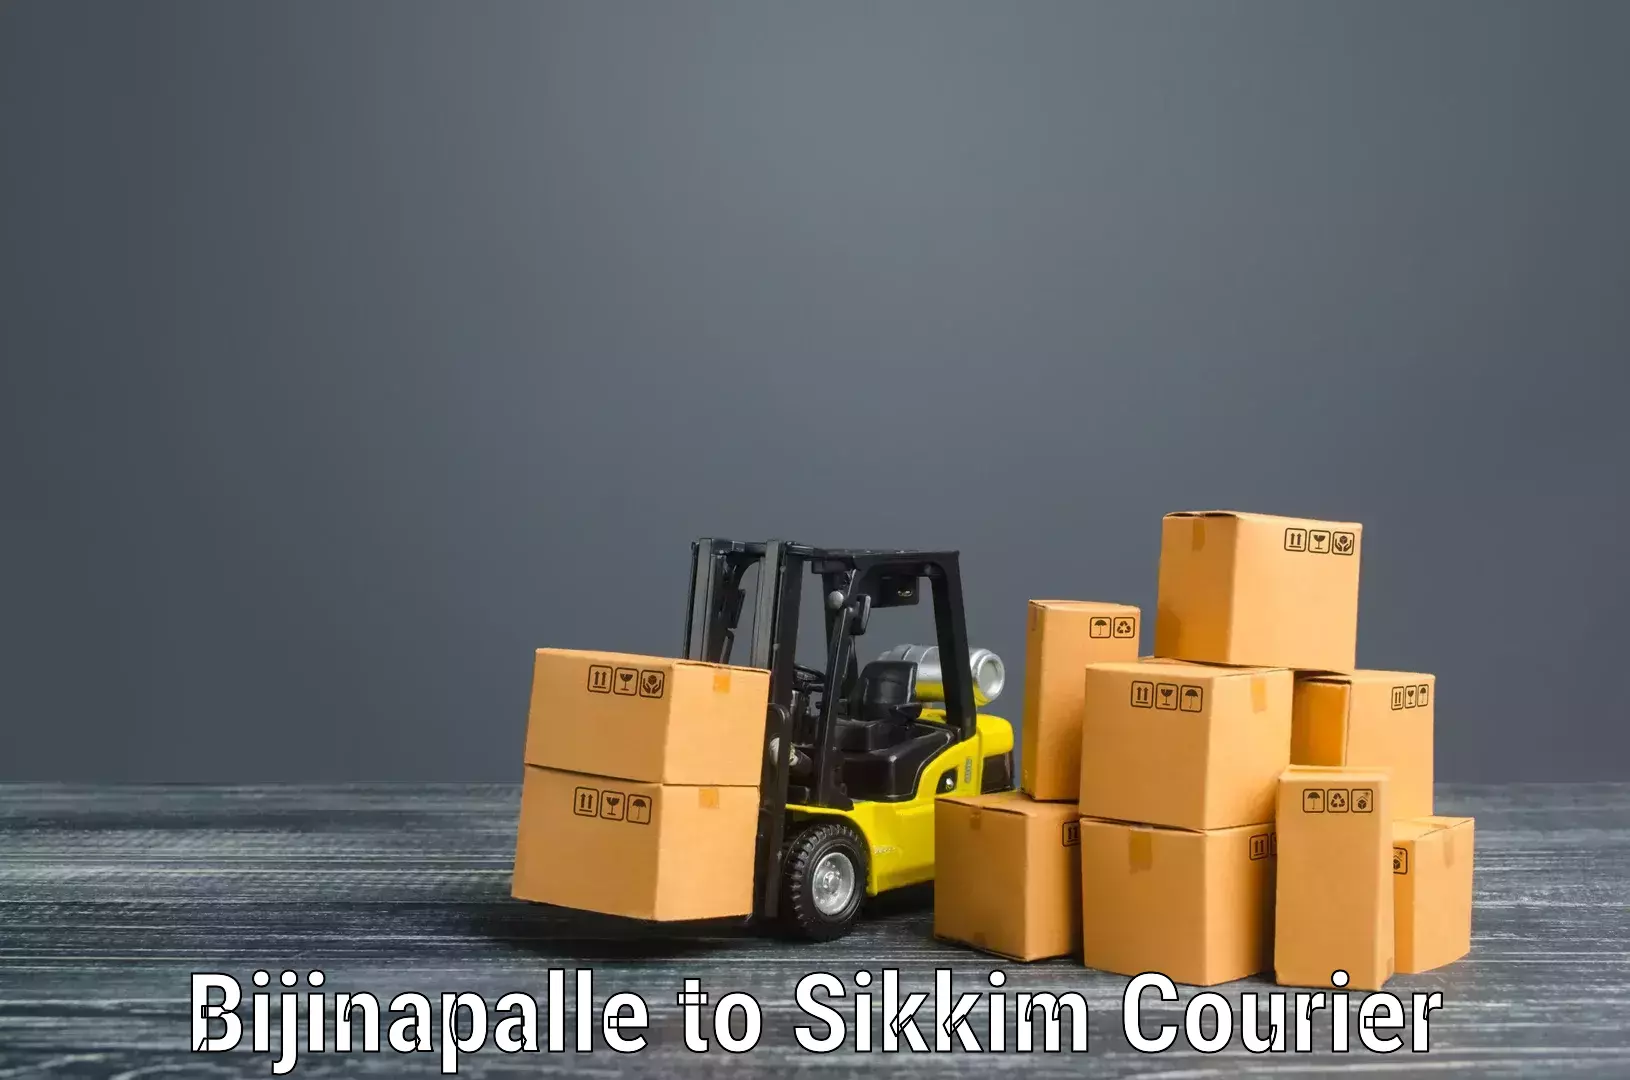 Quality moving company in Bijinapalle to Pelling